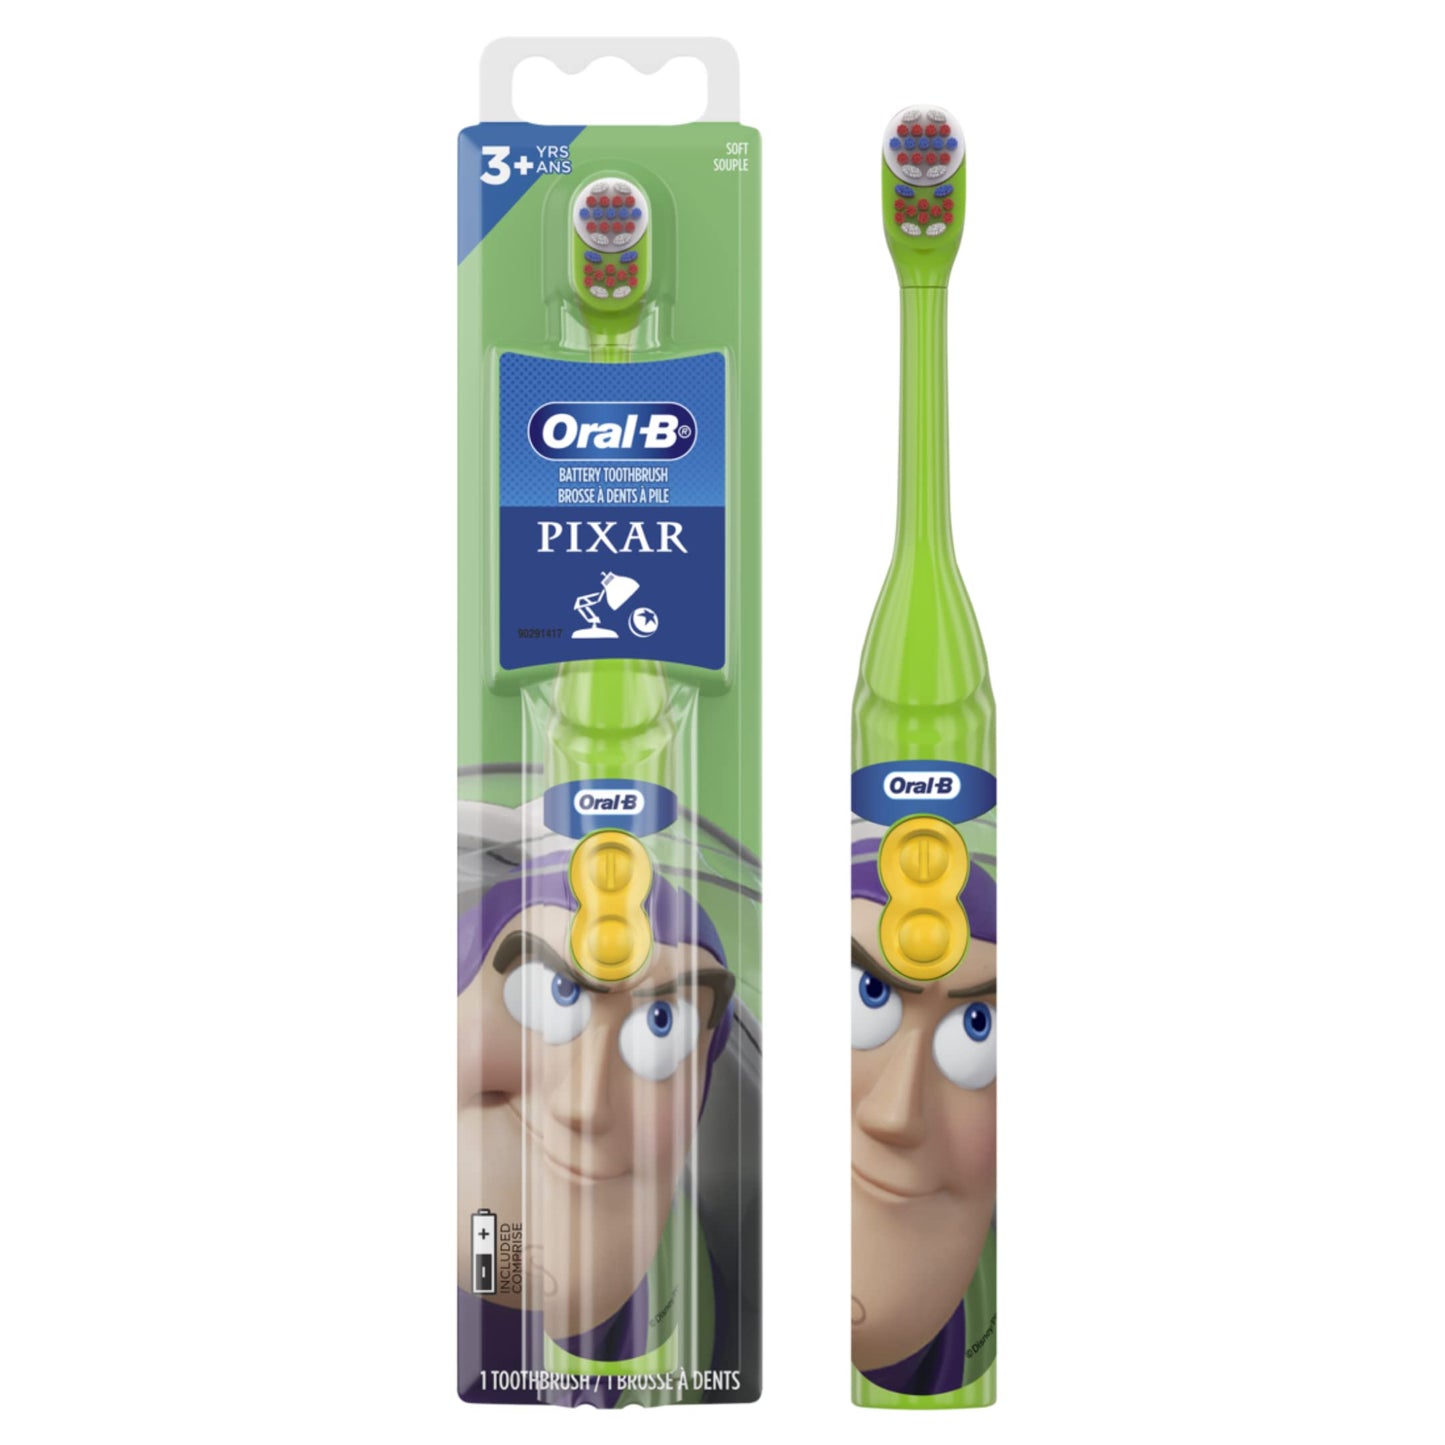 Oral-B Kids Battery Power Electric Toothbrush Featuring Disney's Frozen for Children and Toddlers age 3+, Soft (Characters May Vary)